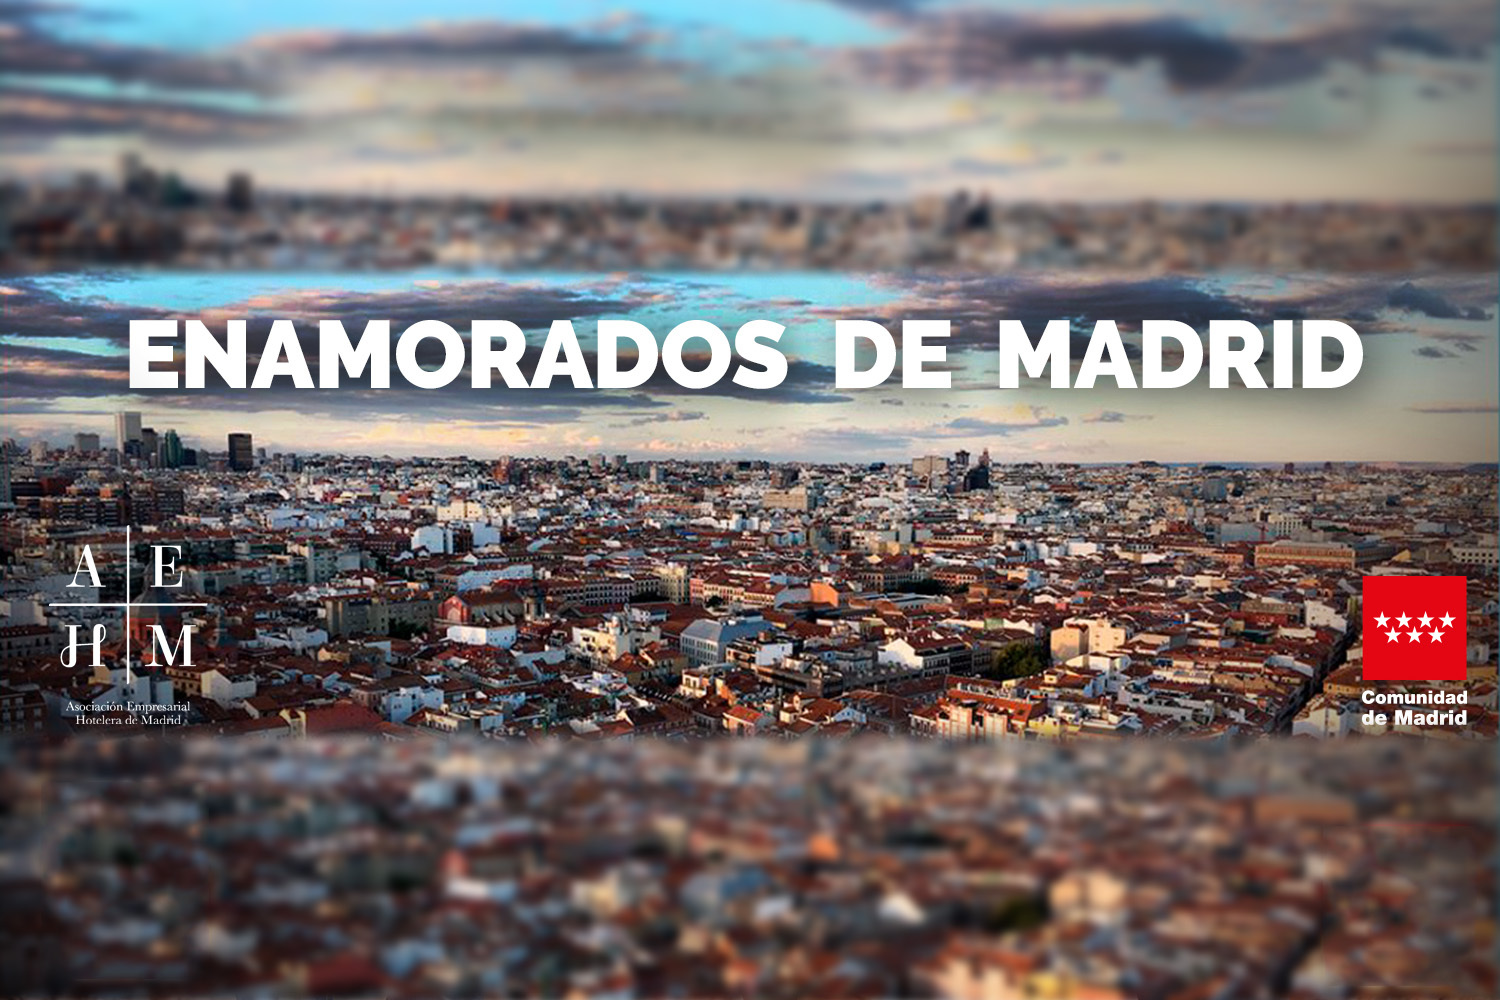 In Love with Madrid